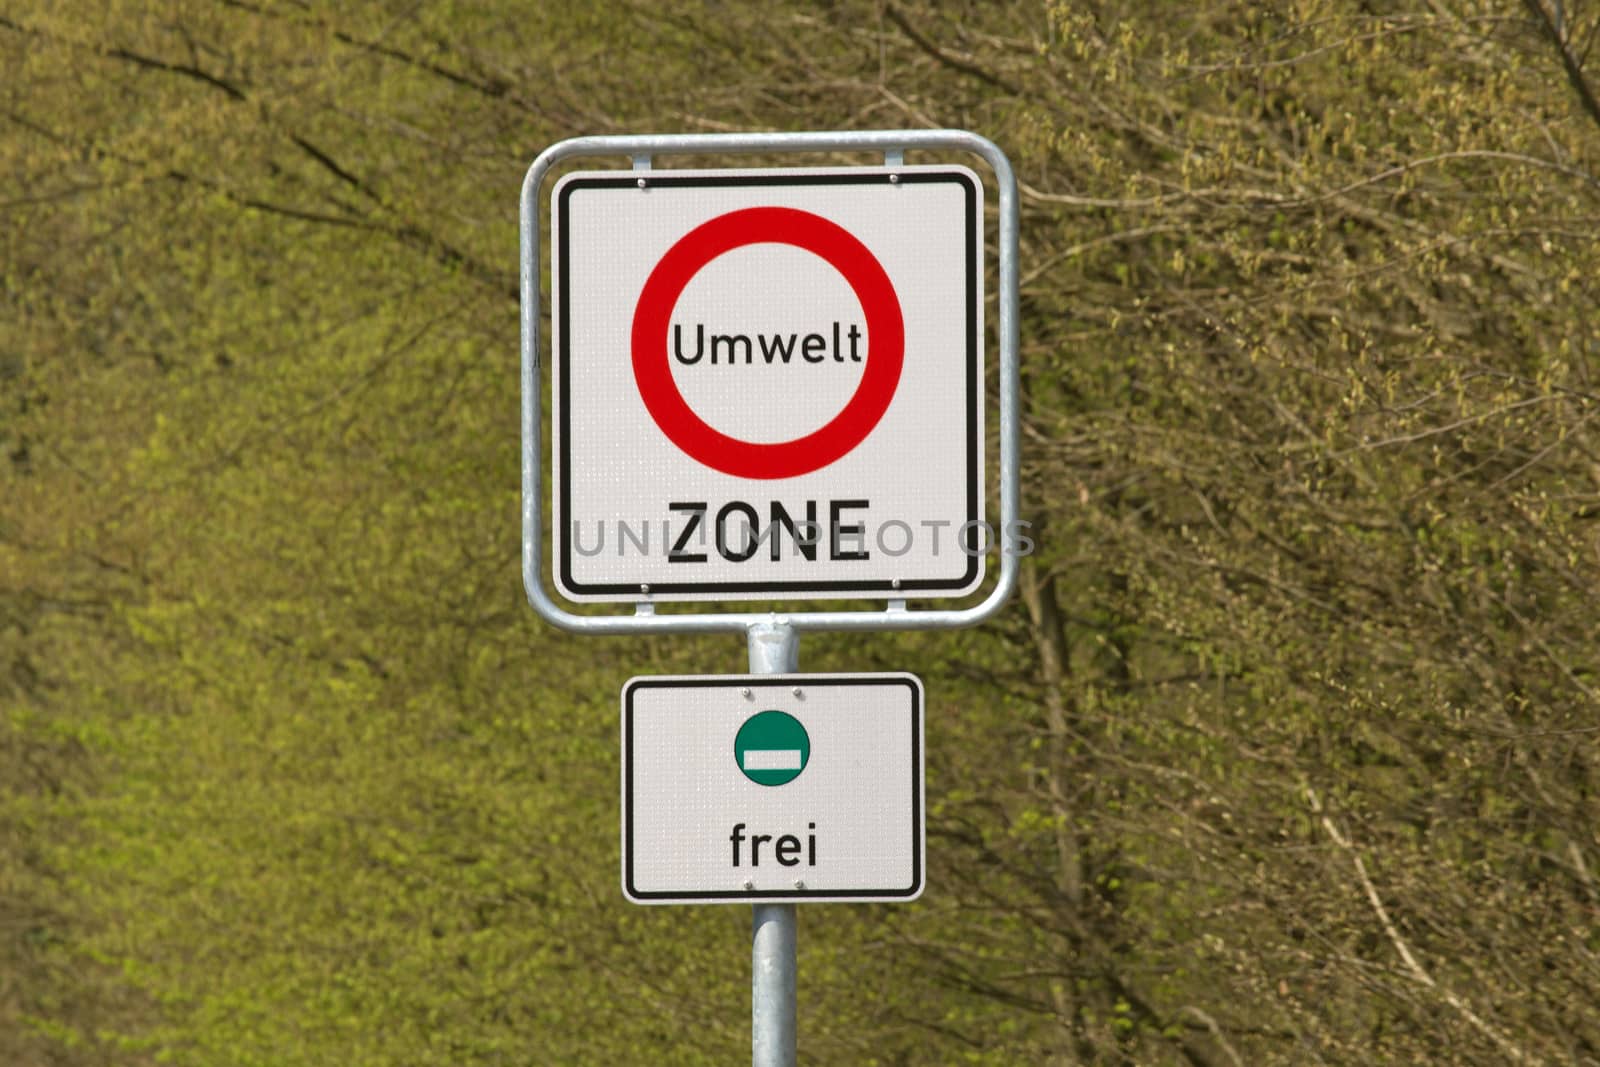 German sign environment zone, green plaque